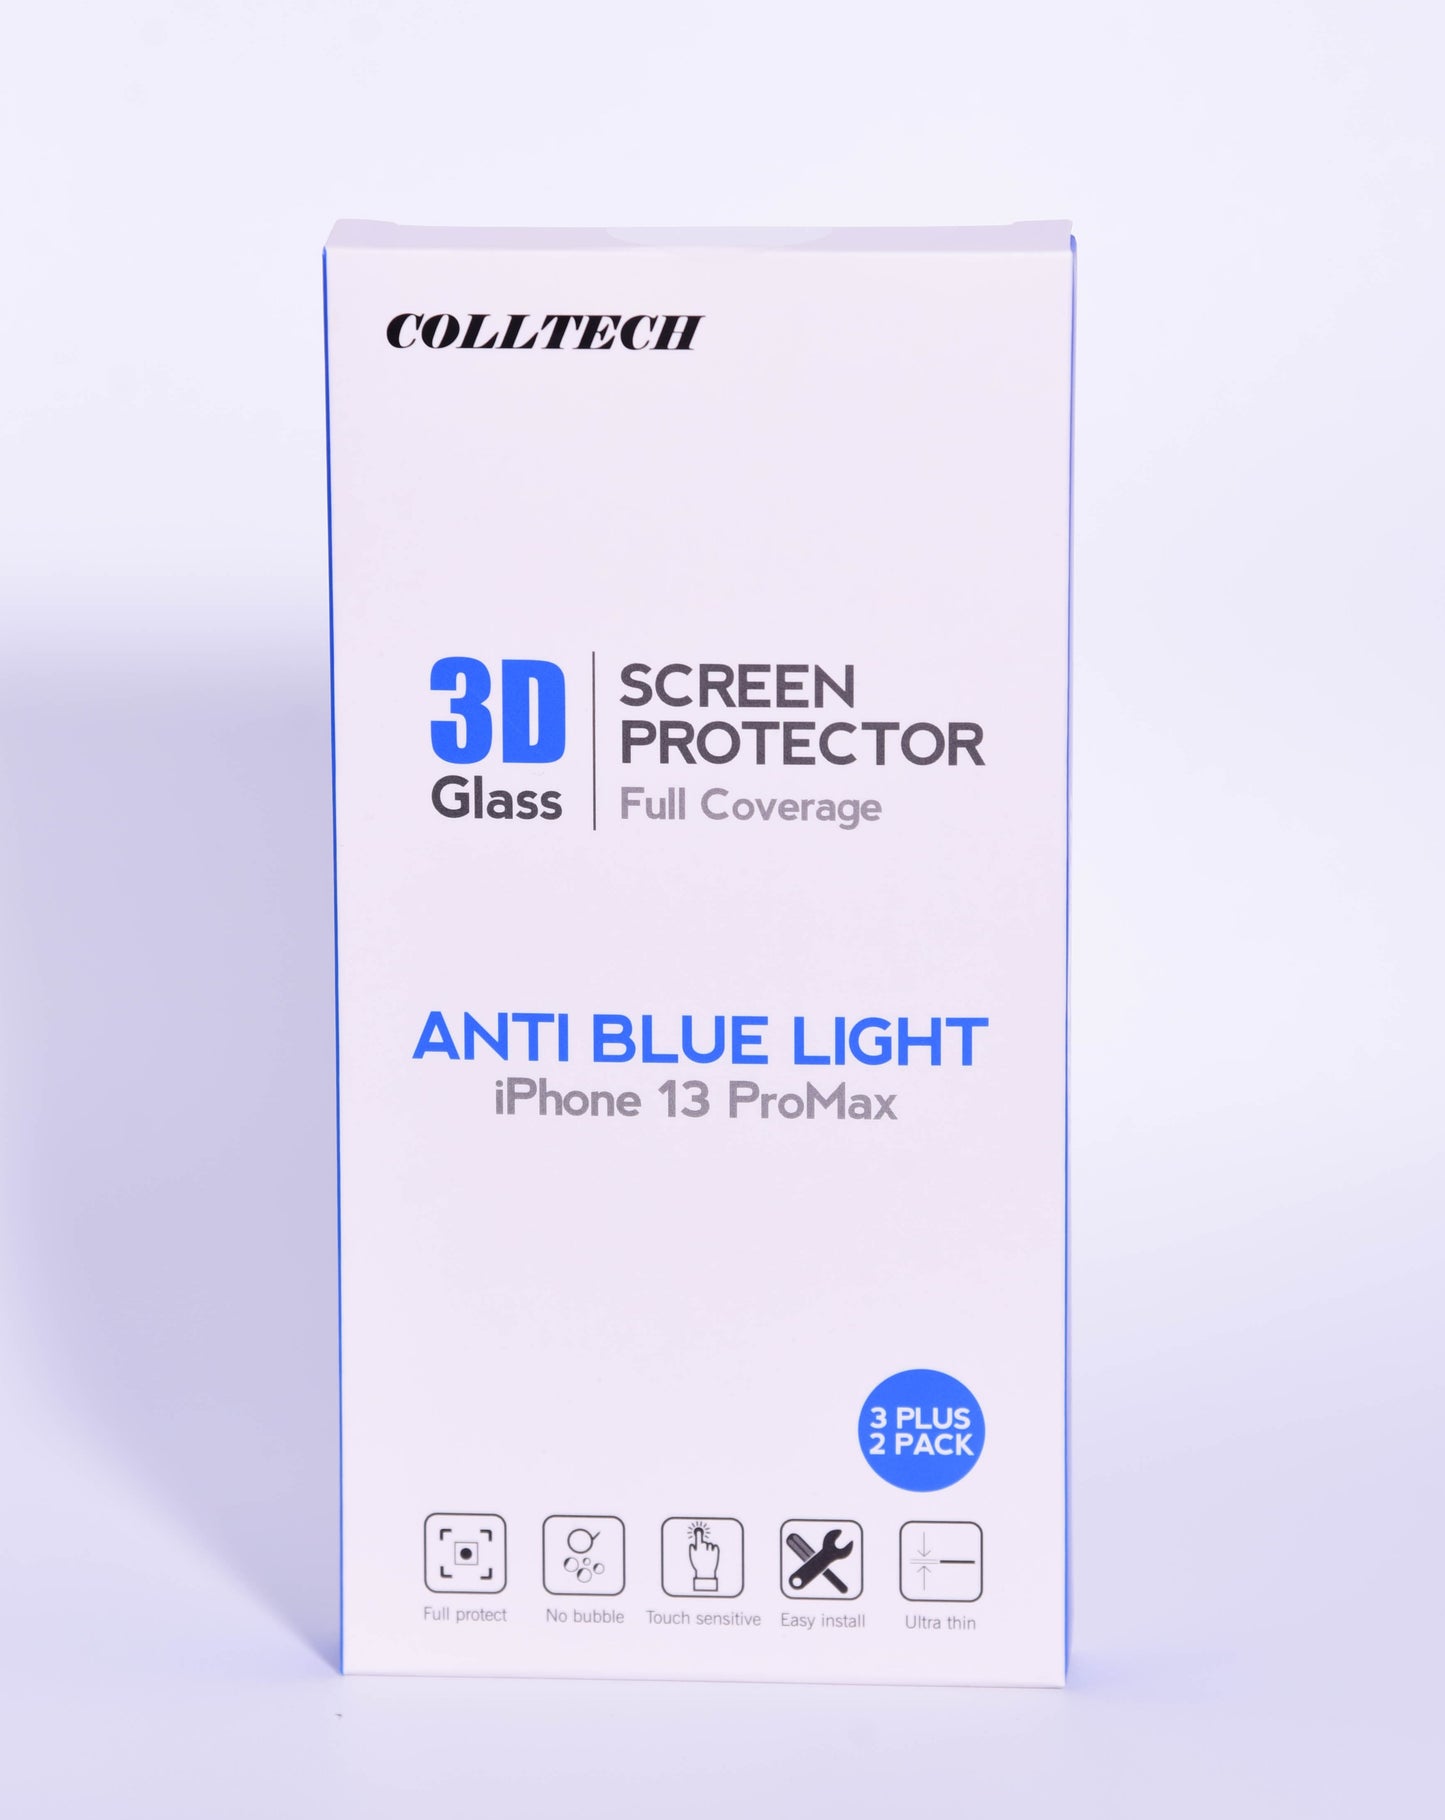 Colltech 3D Glass ANTI BLUE LIGHT Screen Protector for IPhone 13ProMax 3+2 Pack